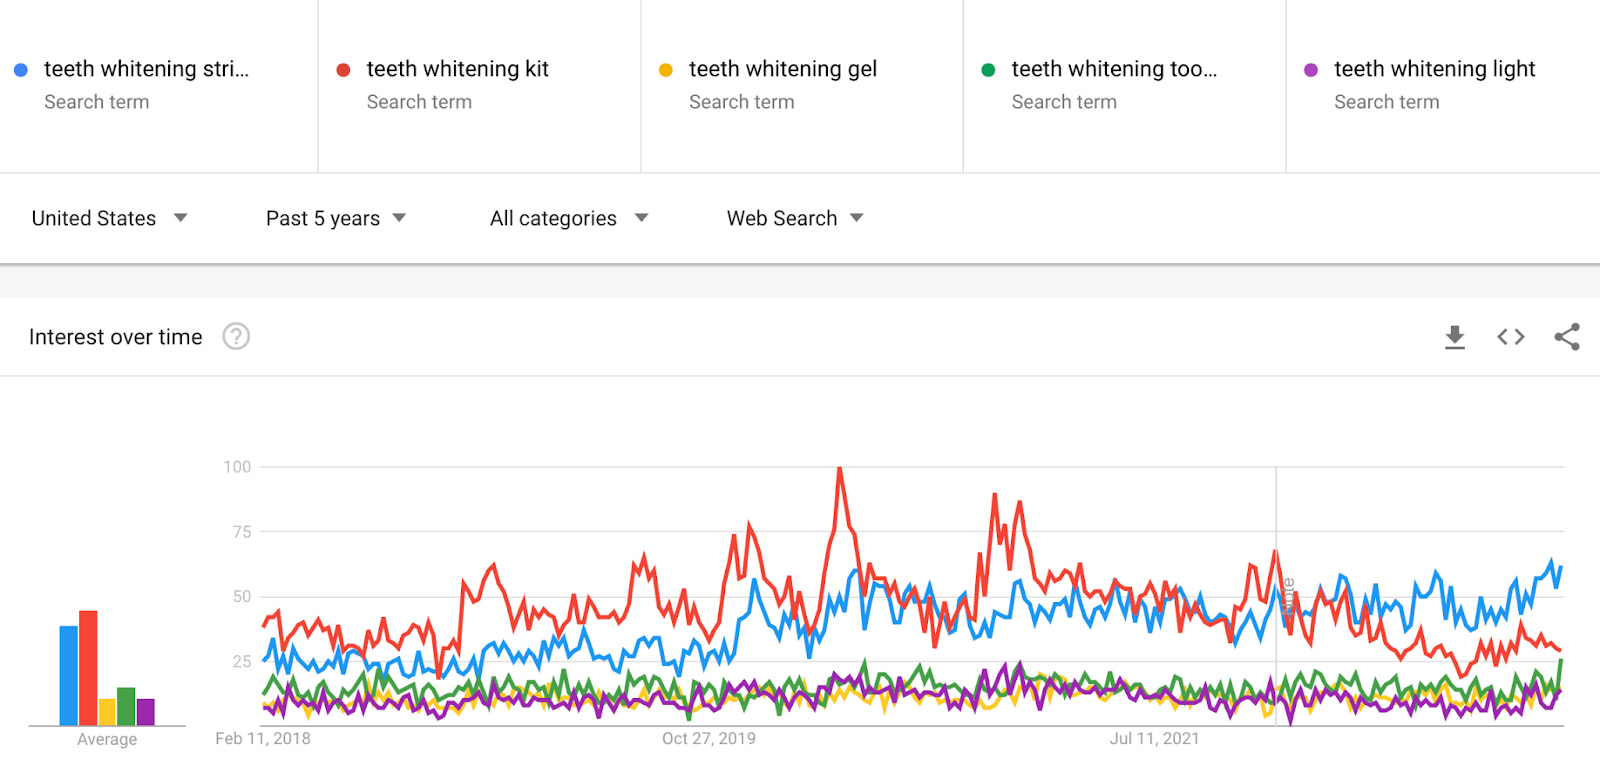 Line chart showing consistent searches for teeth whitening strips, teeth whitening kits, teeth whitening gels, teeth whitening toothpastes, and teeth whitening lights.